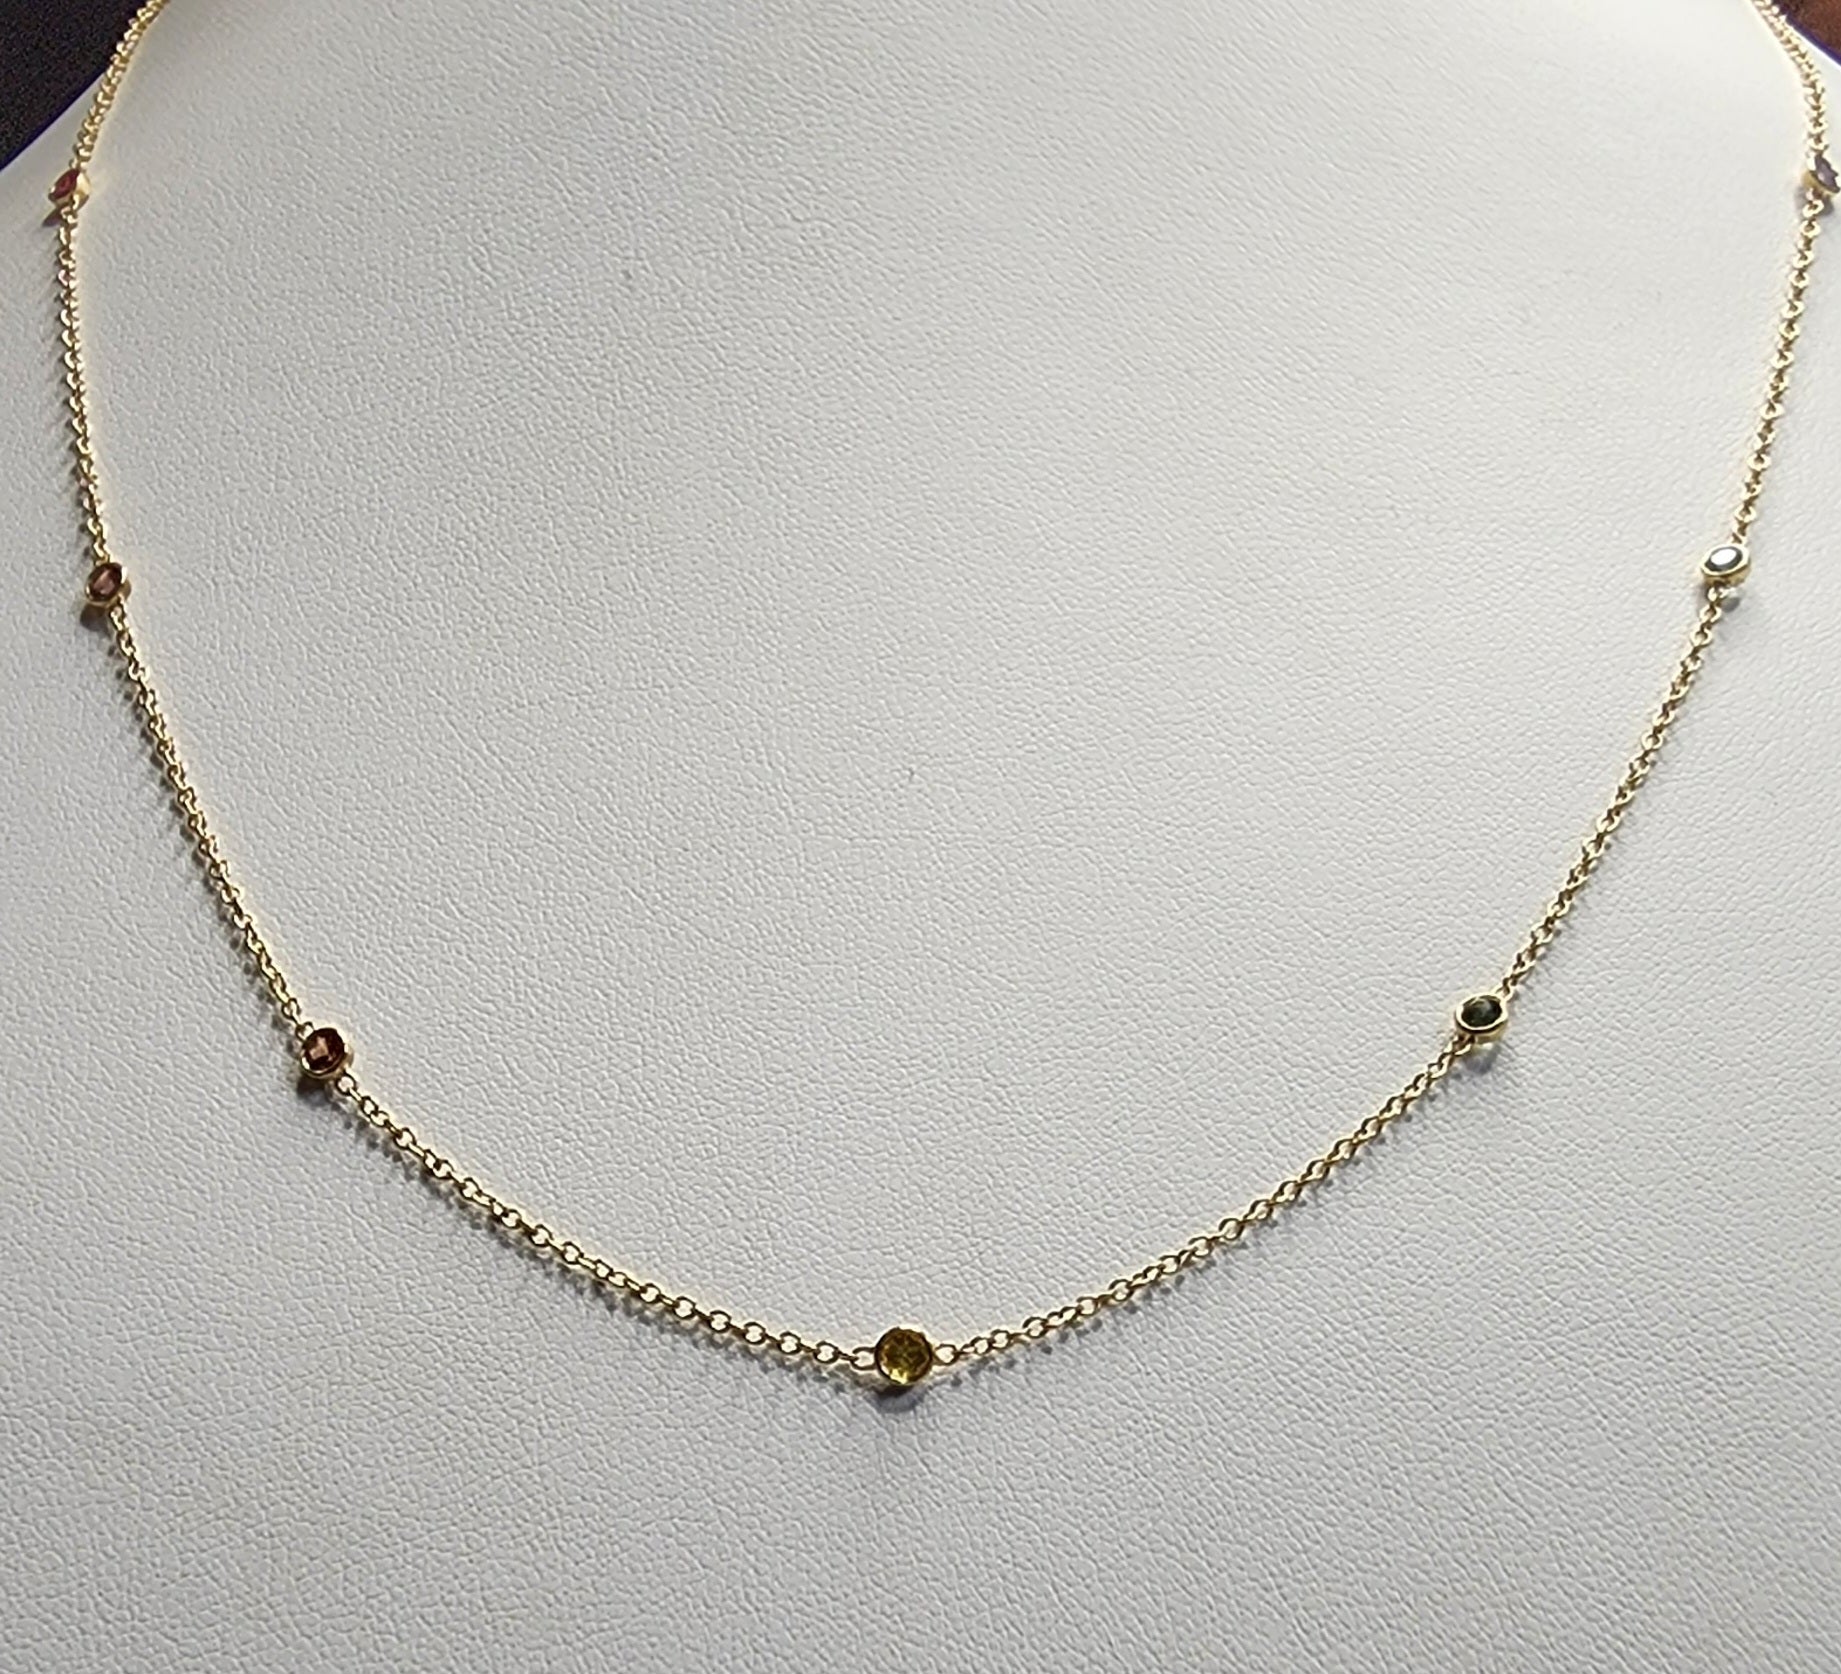 Necklace - Montana Sapphire .88 CTW 7 Rainbow Colored Rounds Bezel Mounted in 14K Yellow Gold